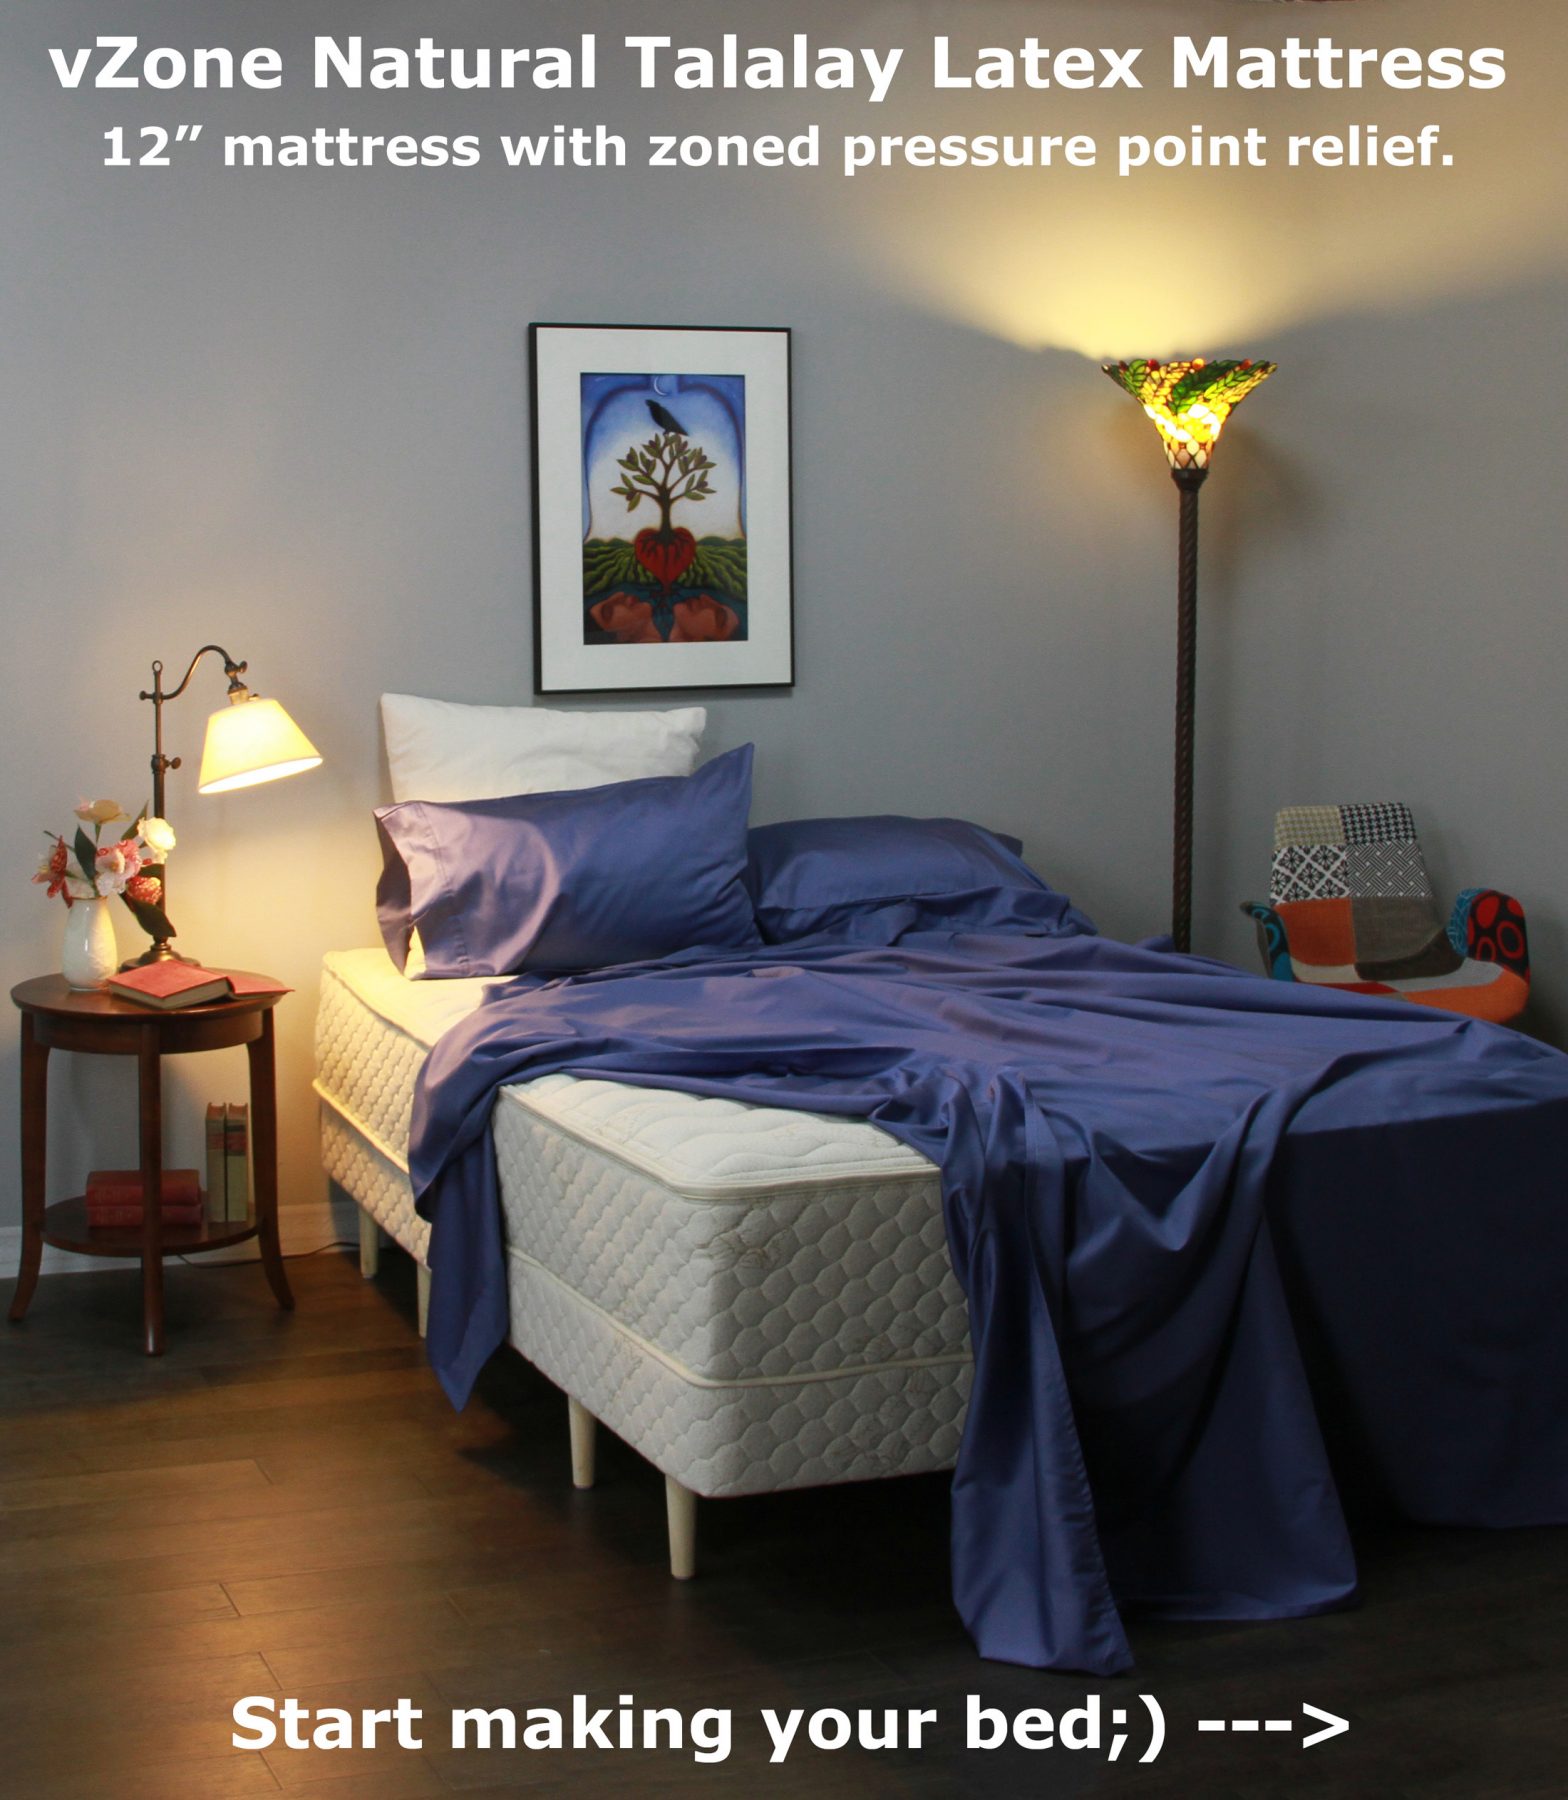 FloBeds vZone Mattress Picture